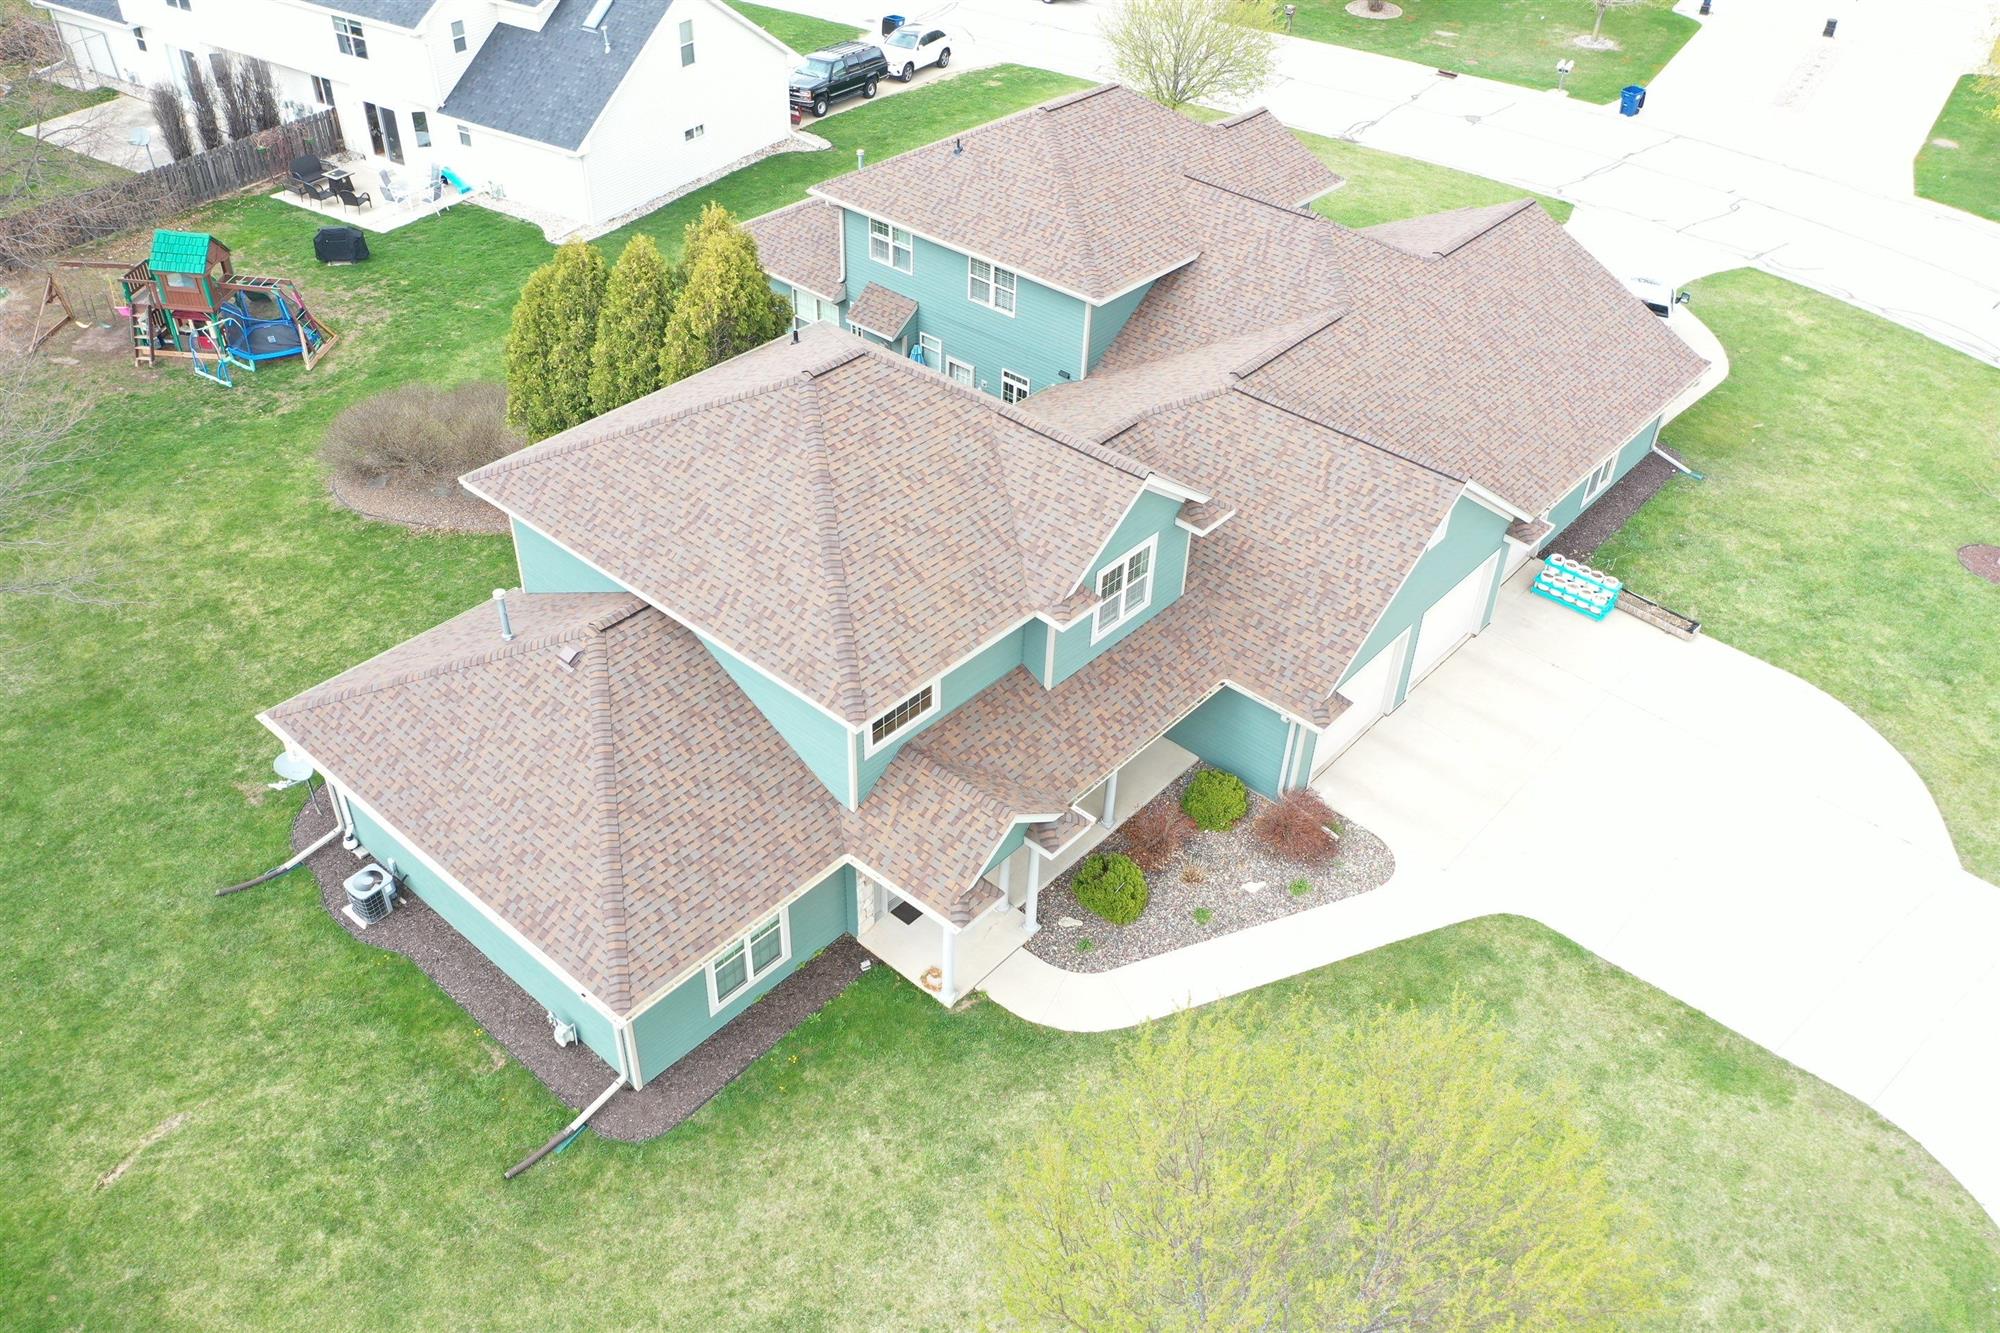 Large home with turquoise siding and a brown roof showing newly installed asphalt shingles in Green Bay, WI